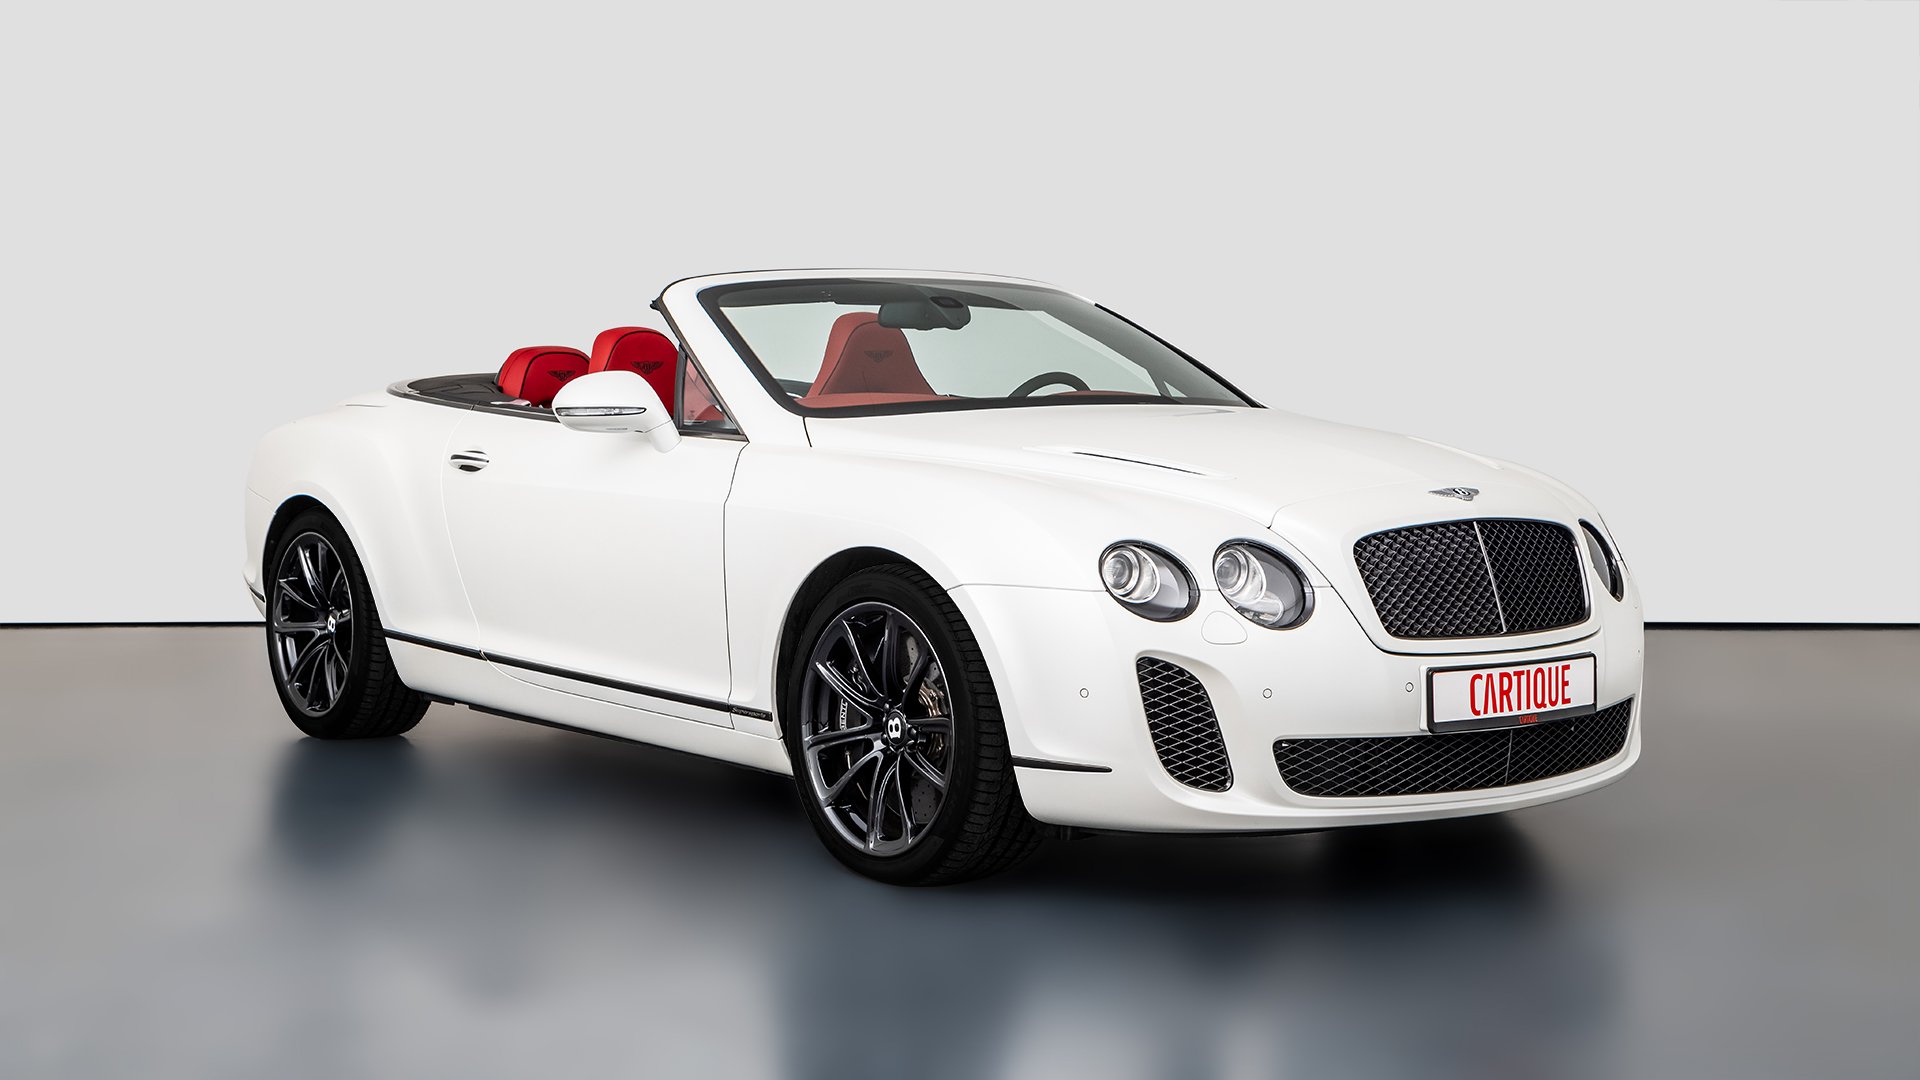 https://www.classicdriver.com/sites/default/files/users/31463/cars_images/31463-990146-car-20231116_160918-bentley_continental_gt_ss_cabrio-2_kopie.jpg